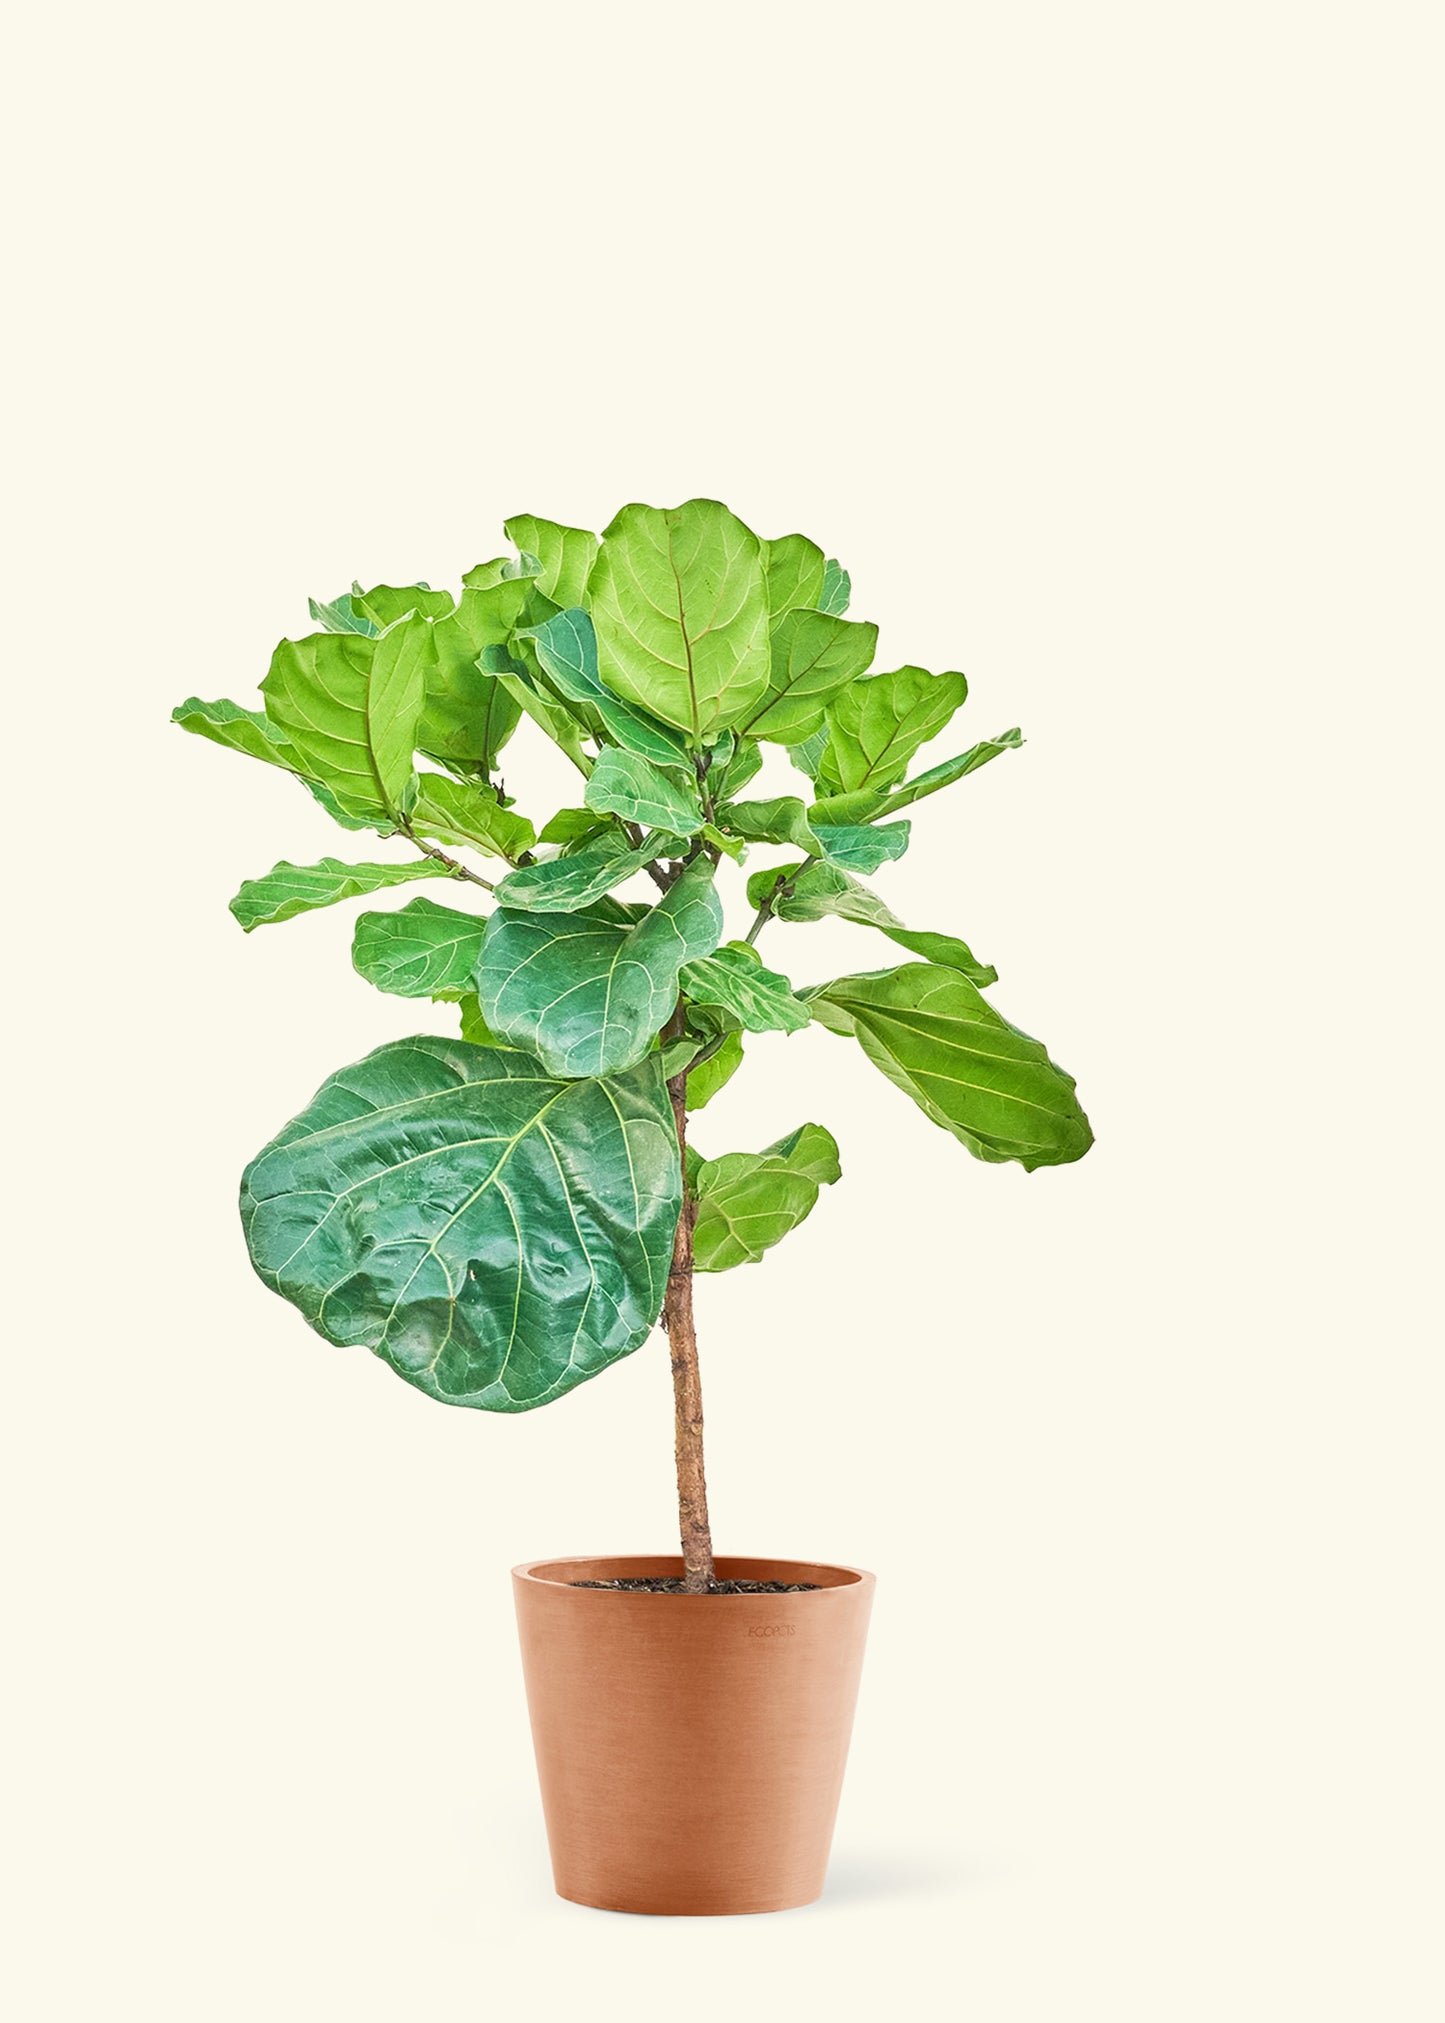 Large Fiddle Leaf Fig Plant in a terracotta pot.